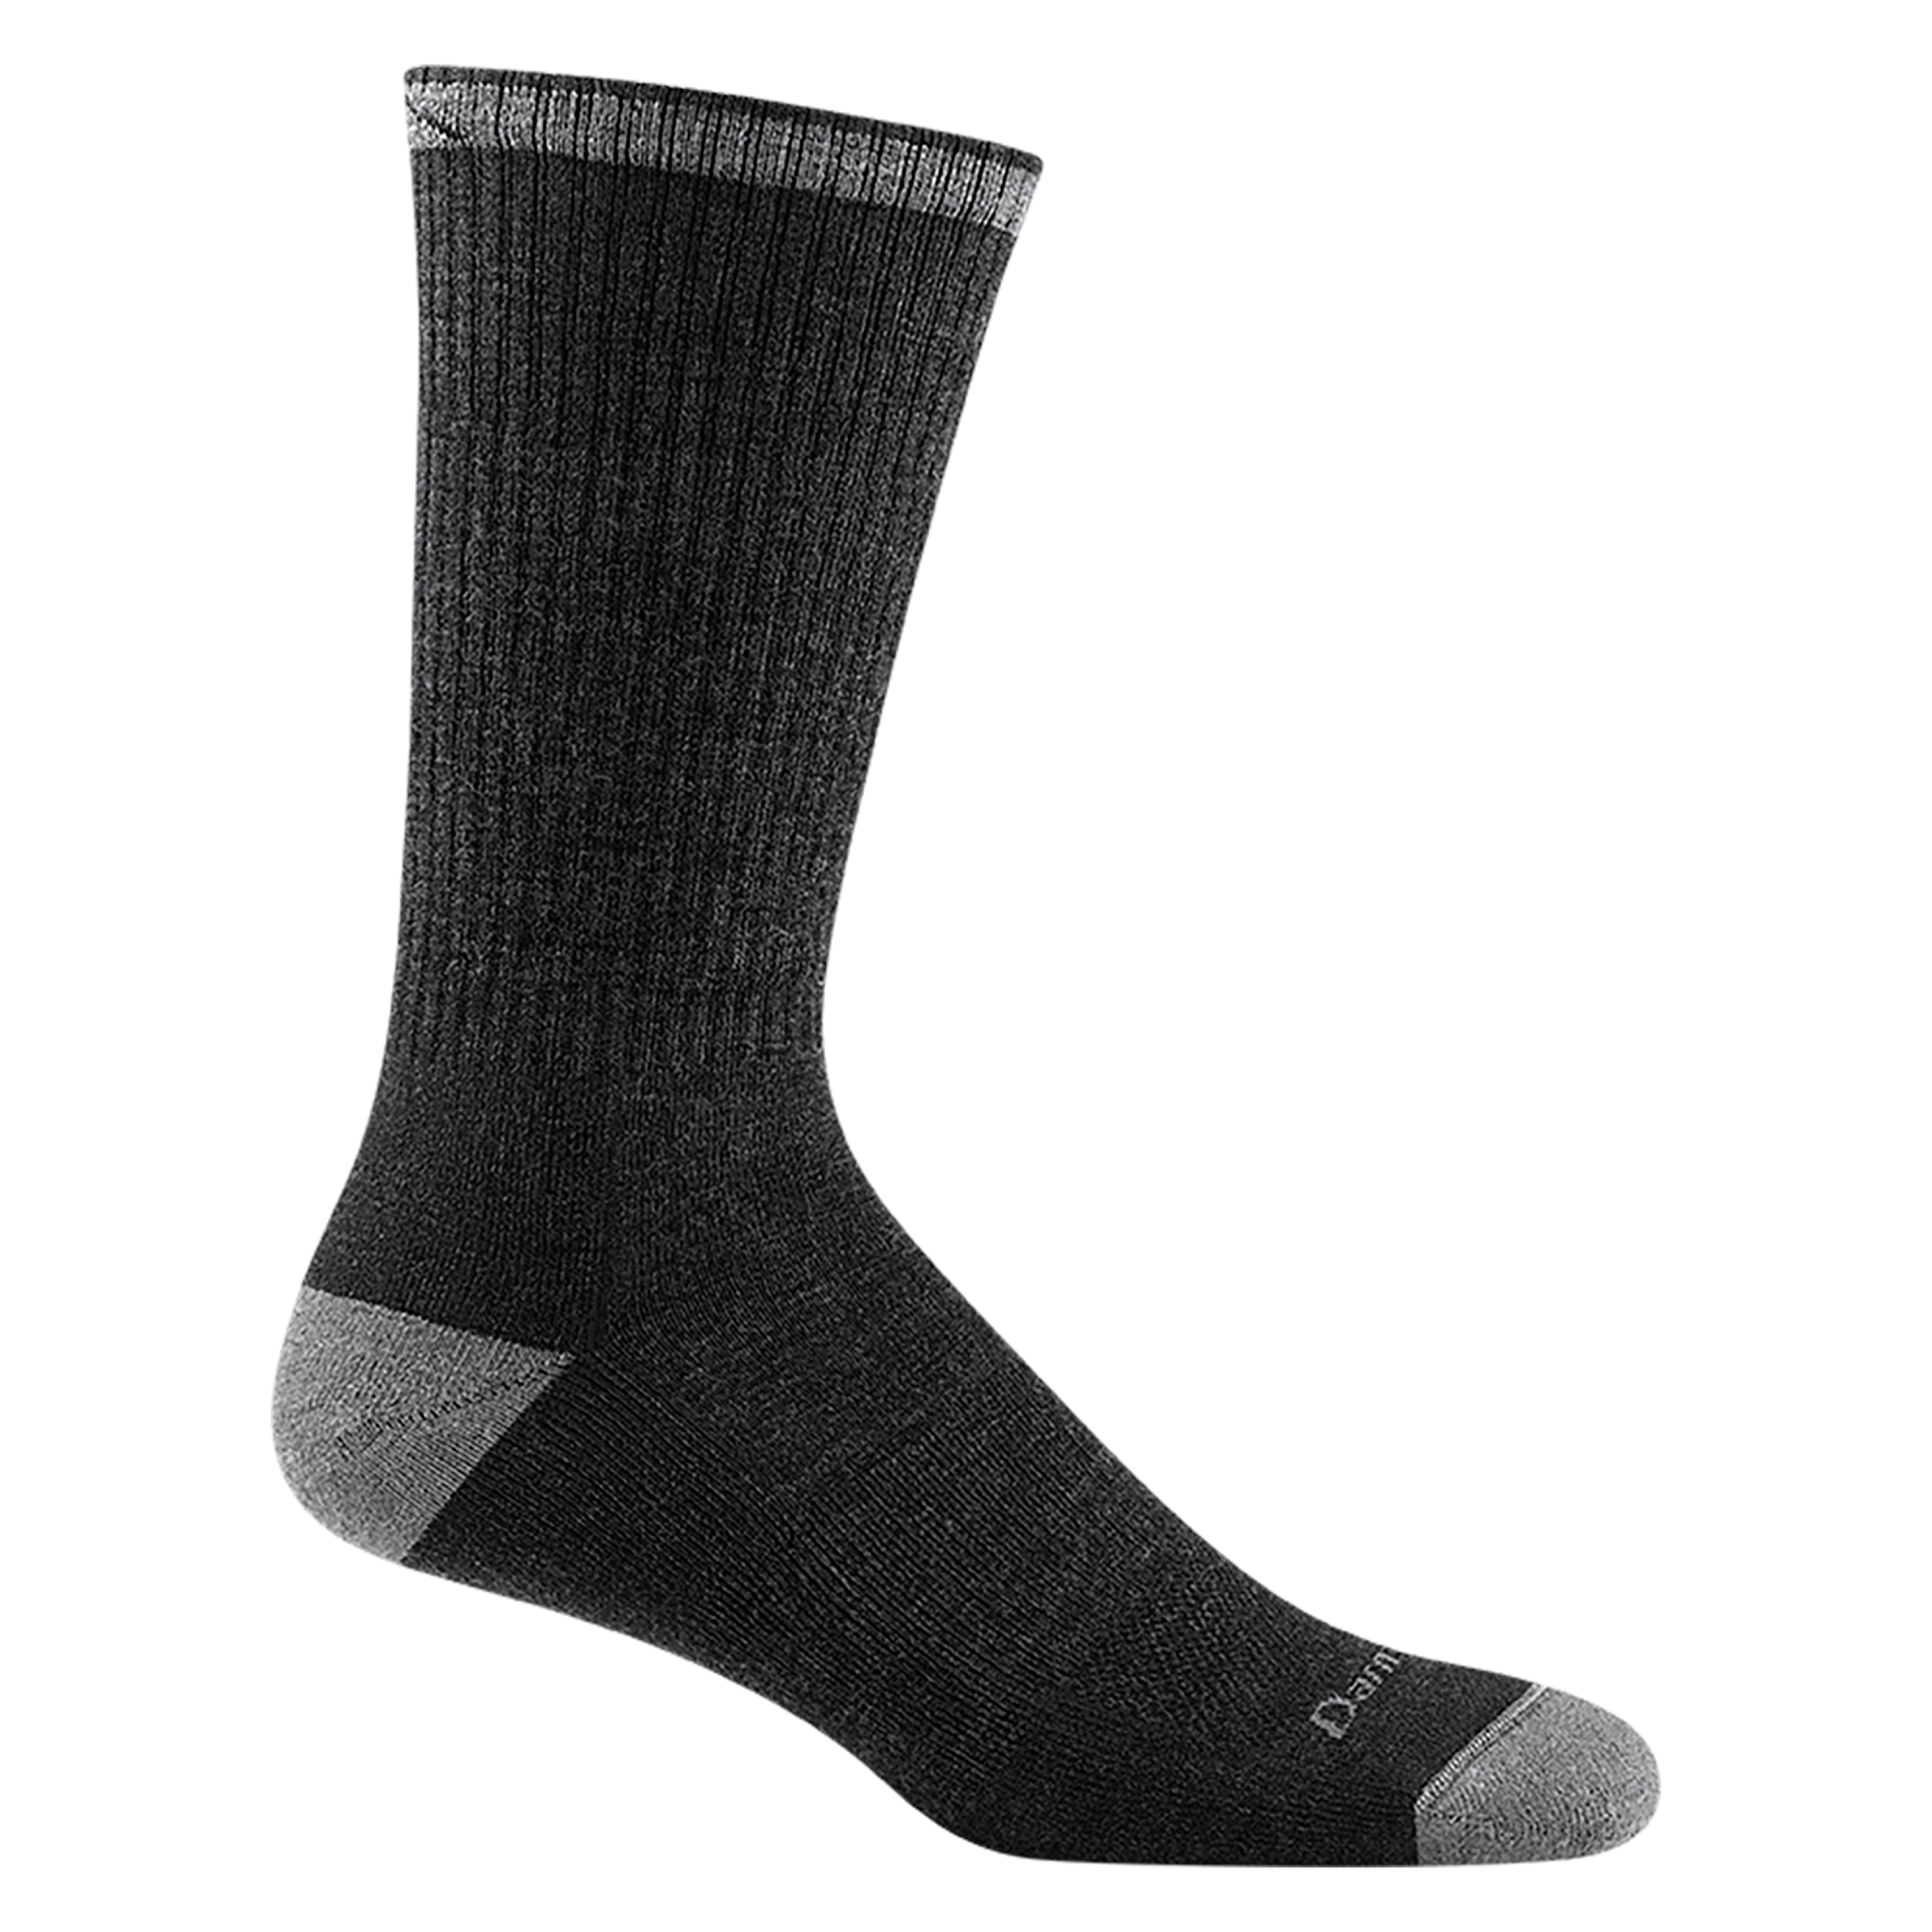 2001 men's john henry boot work sock in color dark gray with light gray accents and darn tough forefoot signature